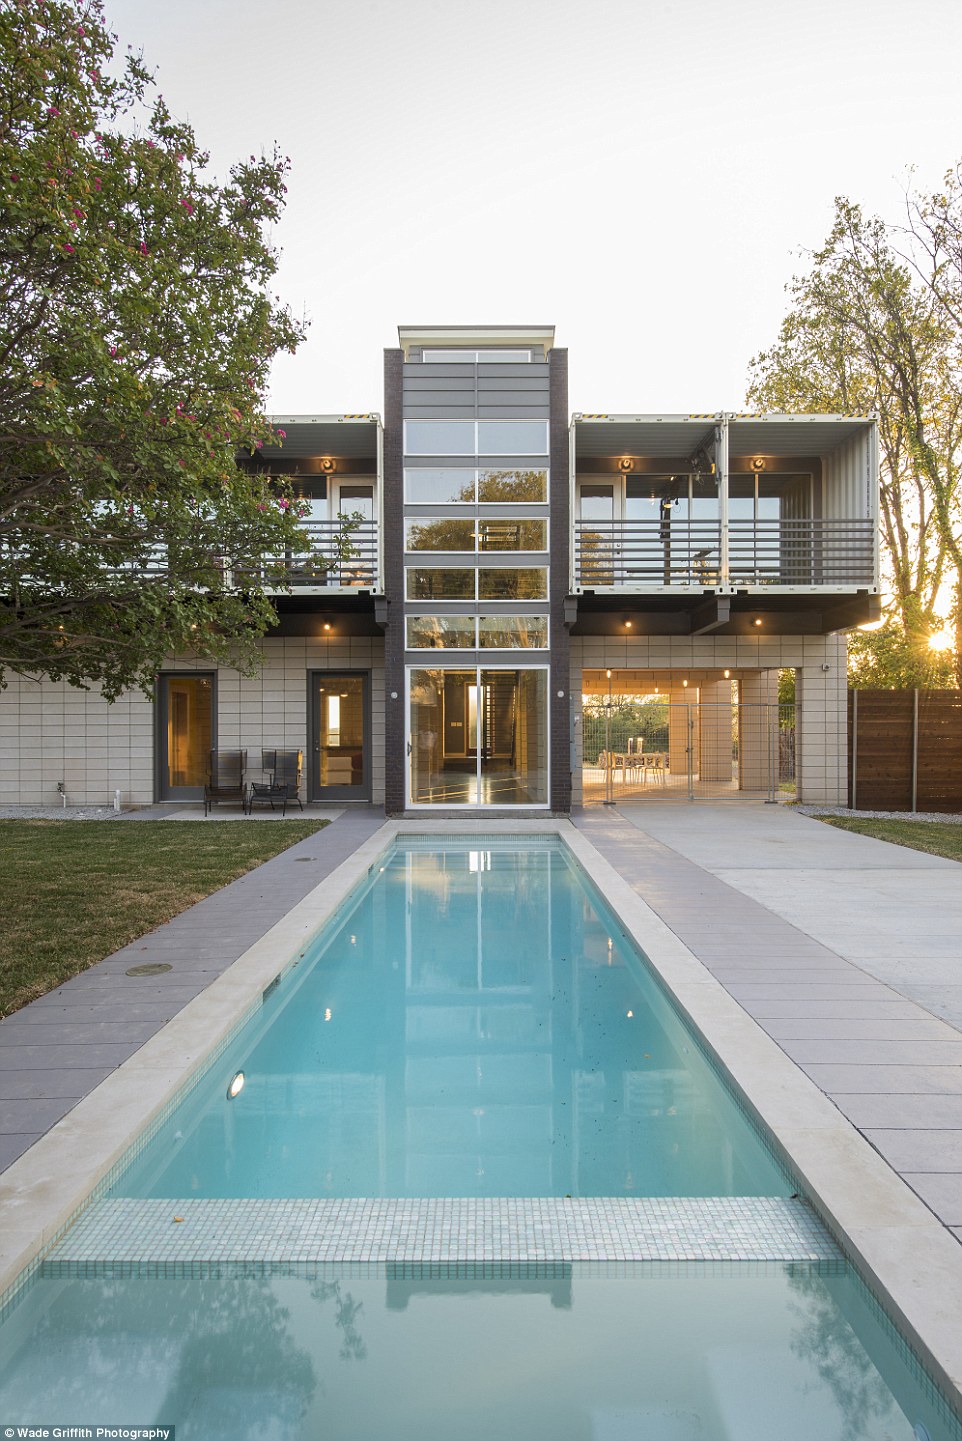 The 3,700 sq ft three-bedroom home, dubbed 'PV14,' boasts a 40ft long swimming pool on the ground floor that reflects the two-story glass-paneled tower, also built out of the containers 